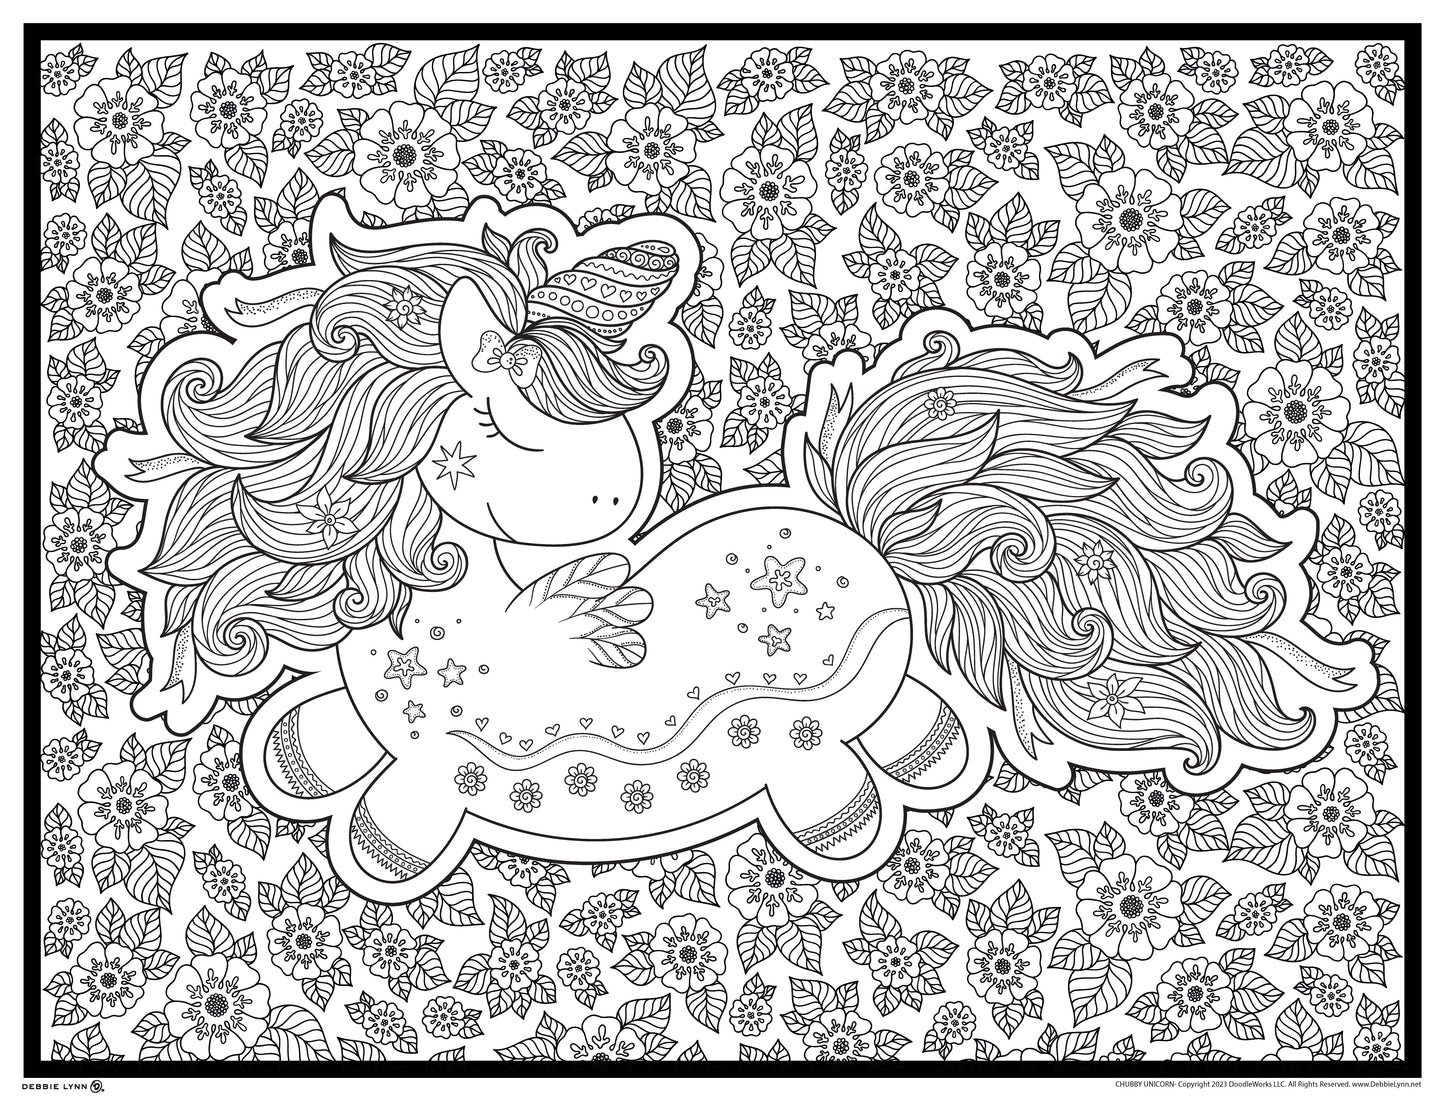 Unicorn Personalized Giant Coloring Poster 46x60 – Debbie Lynn